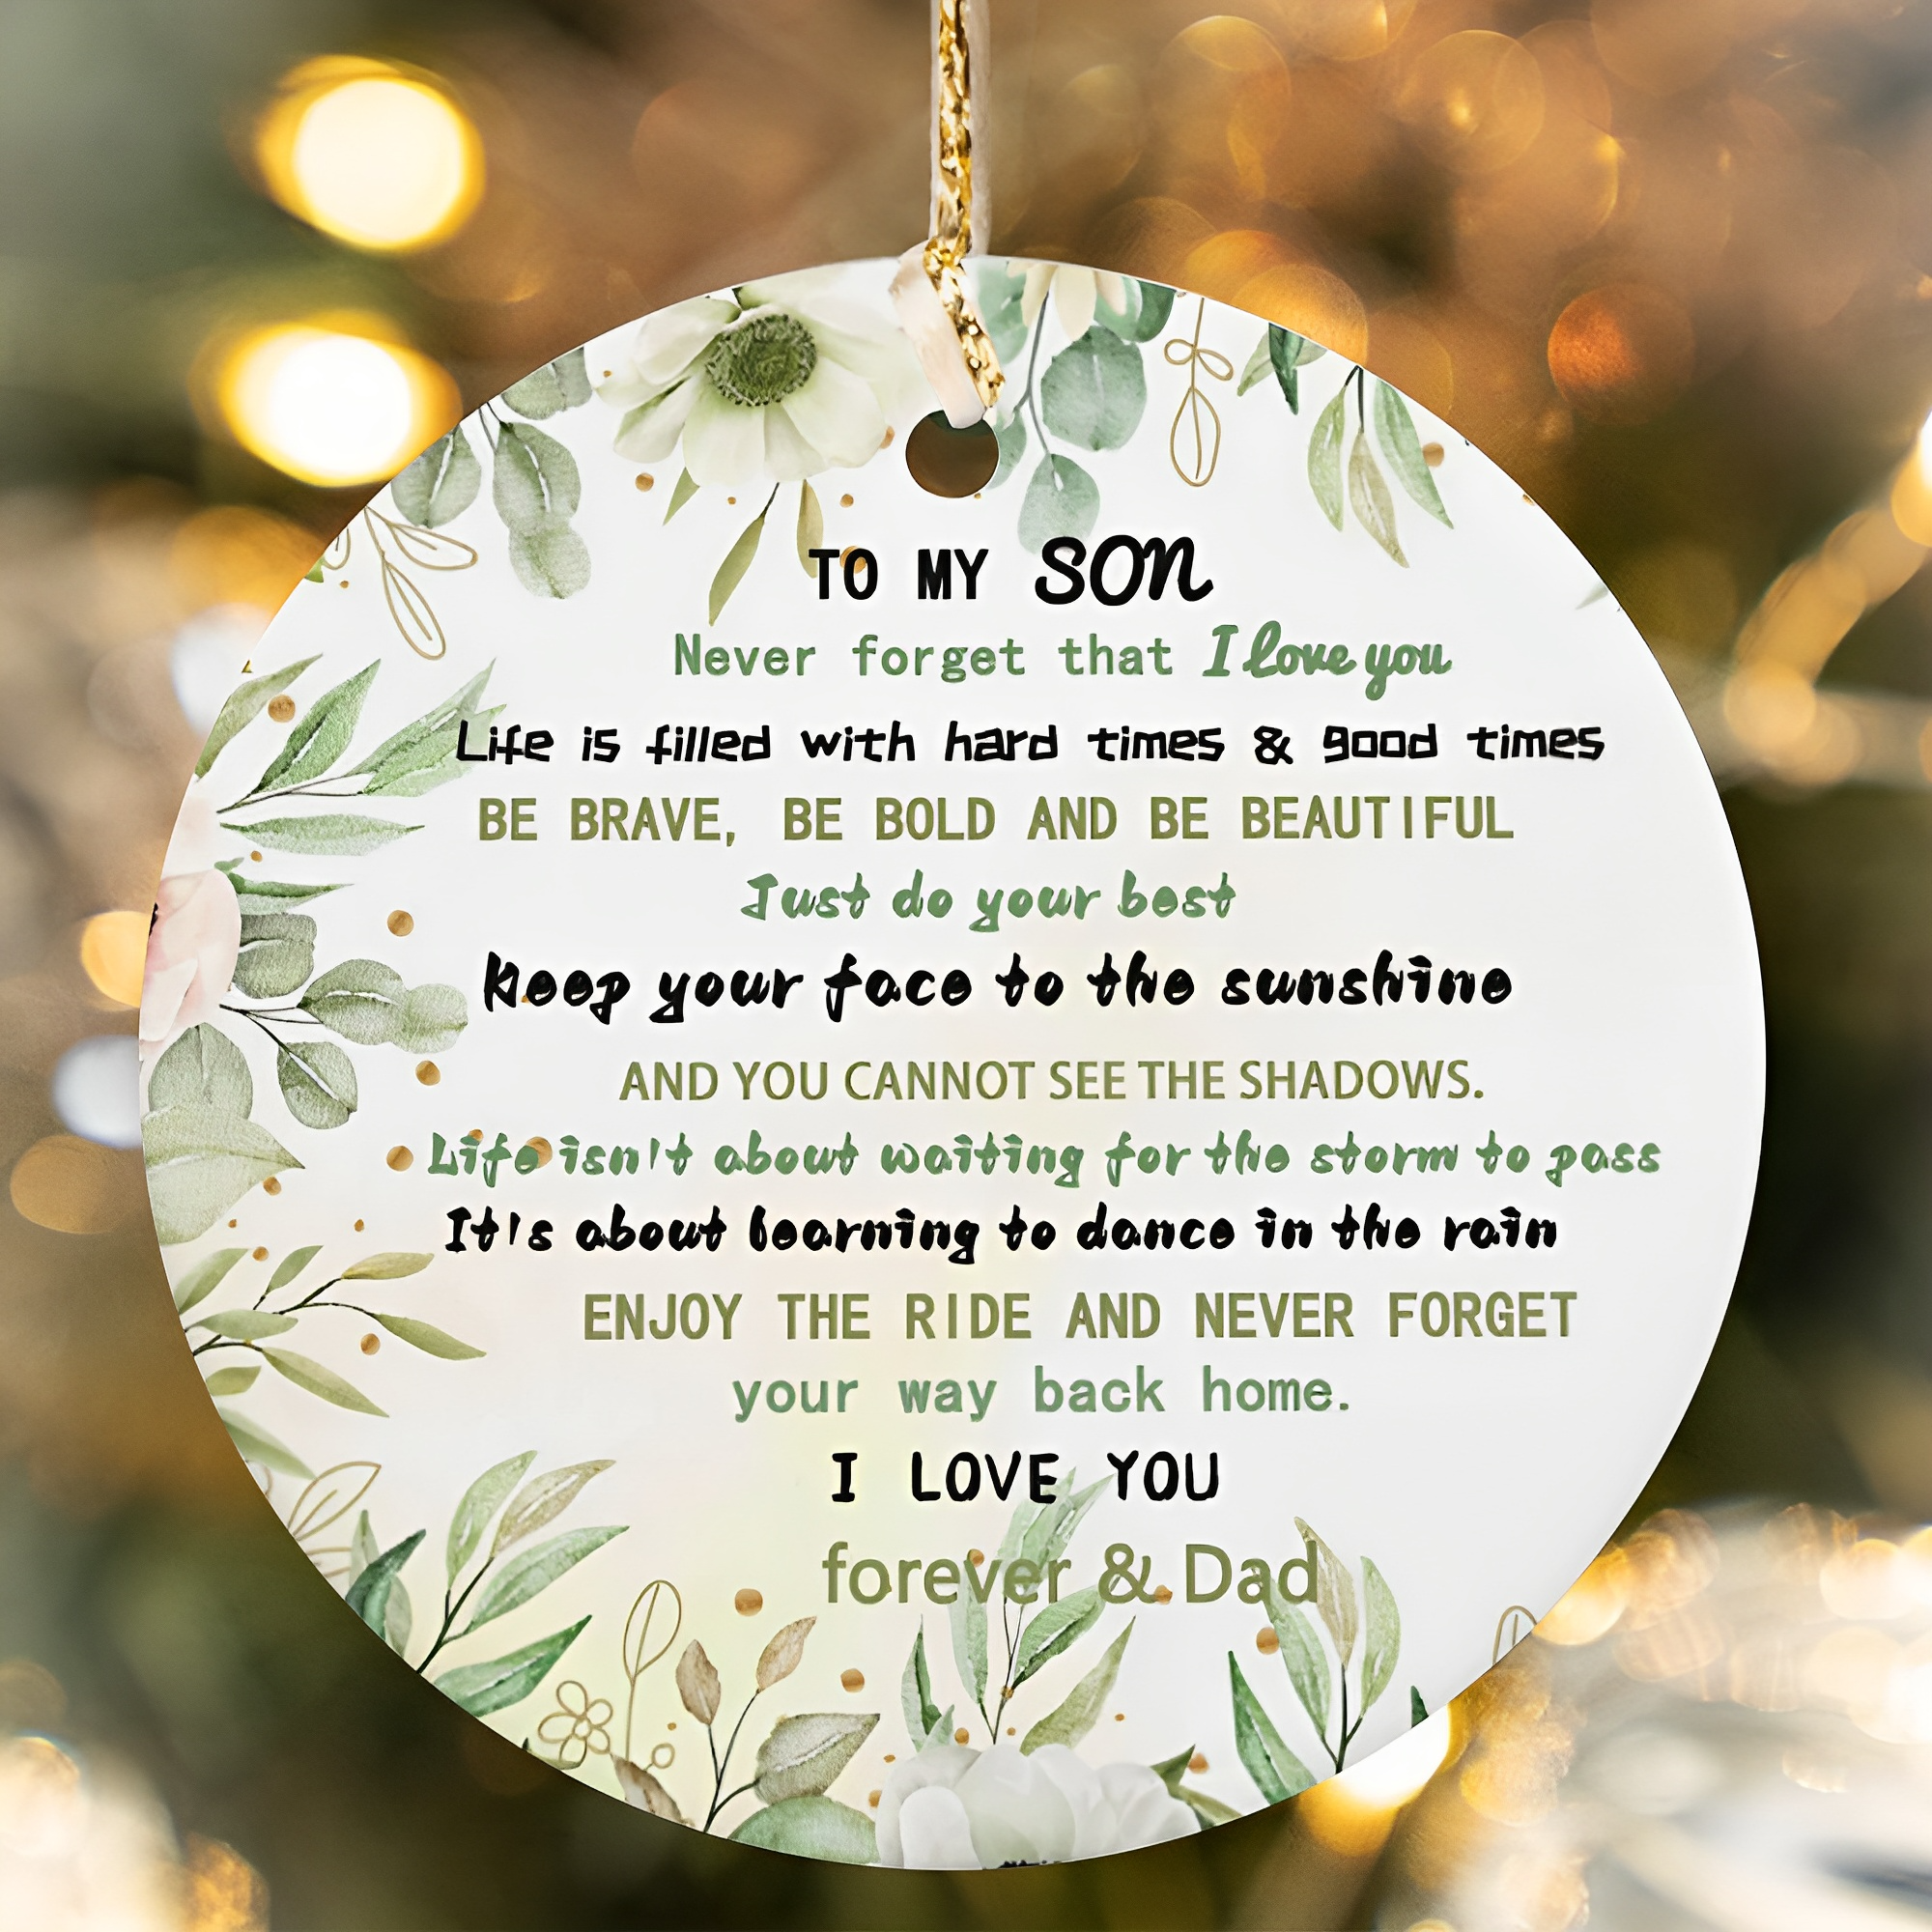 Never Forget That I Love You - Gifts for Son Christmas Ceramic Ornament